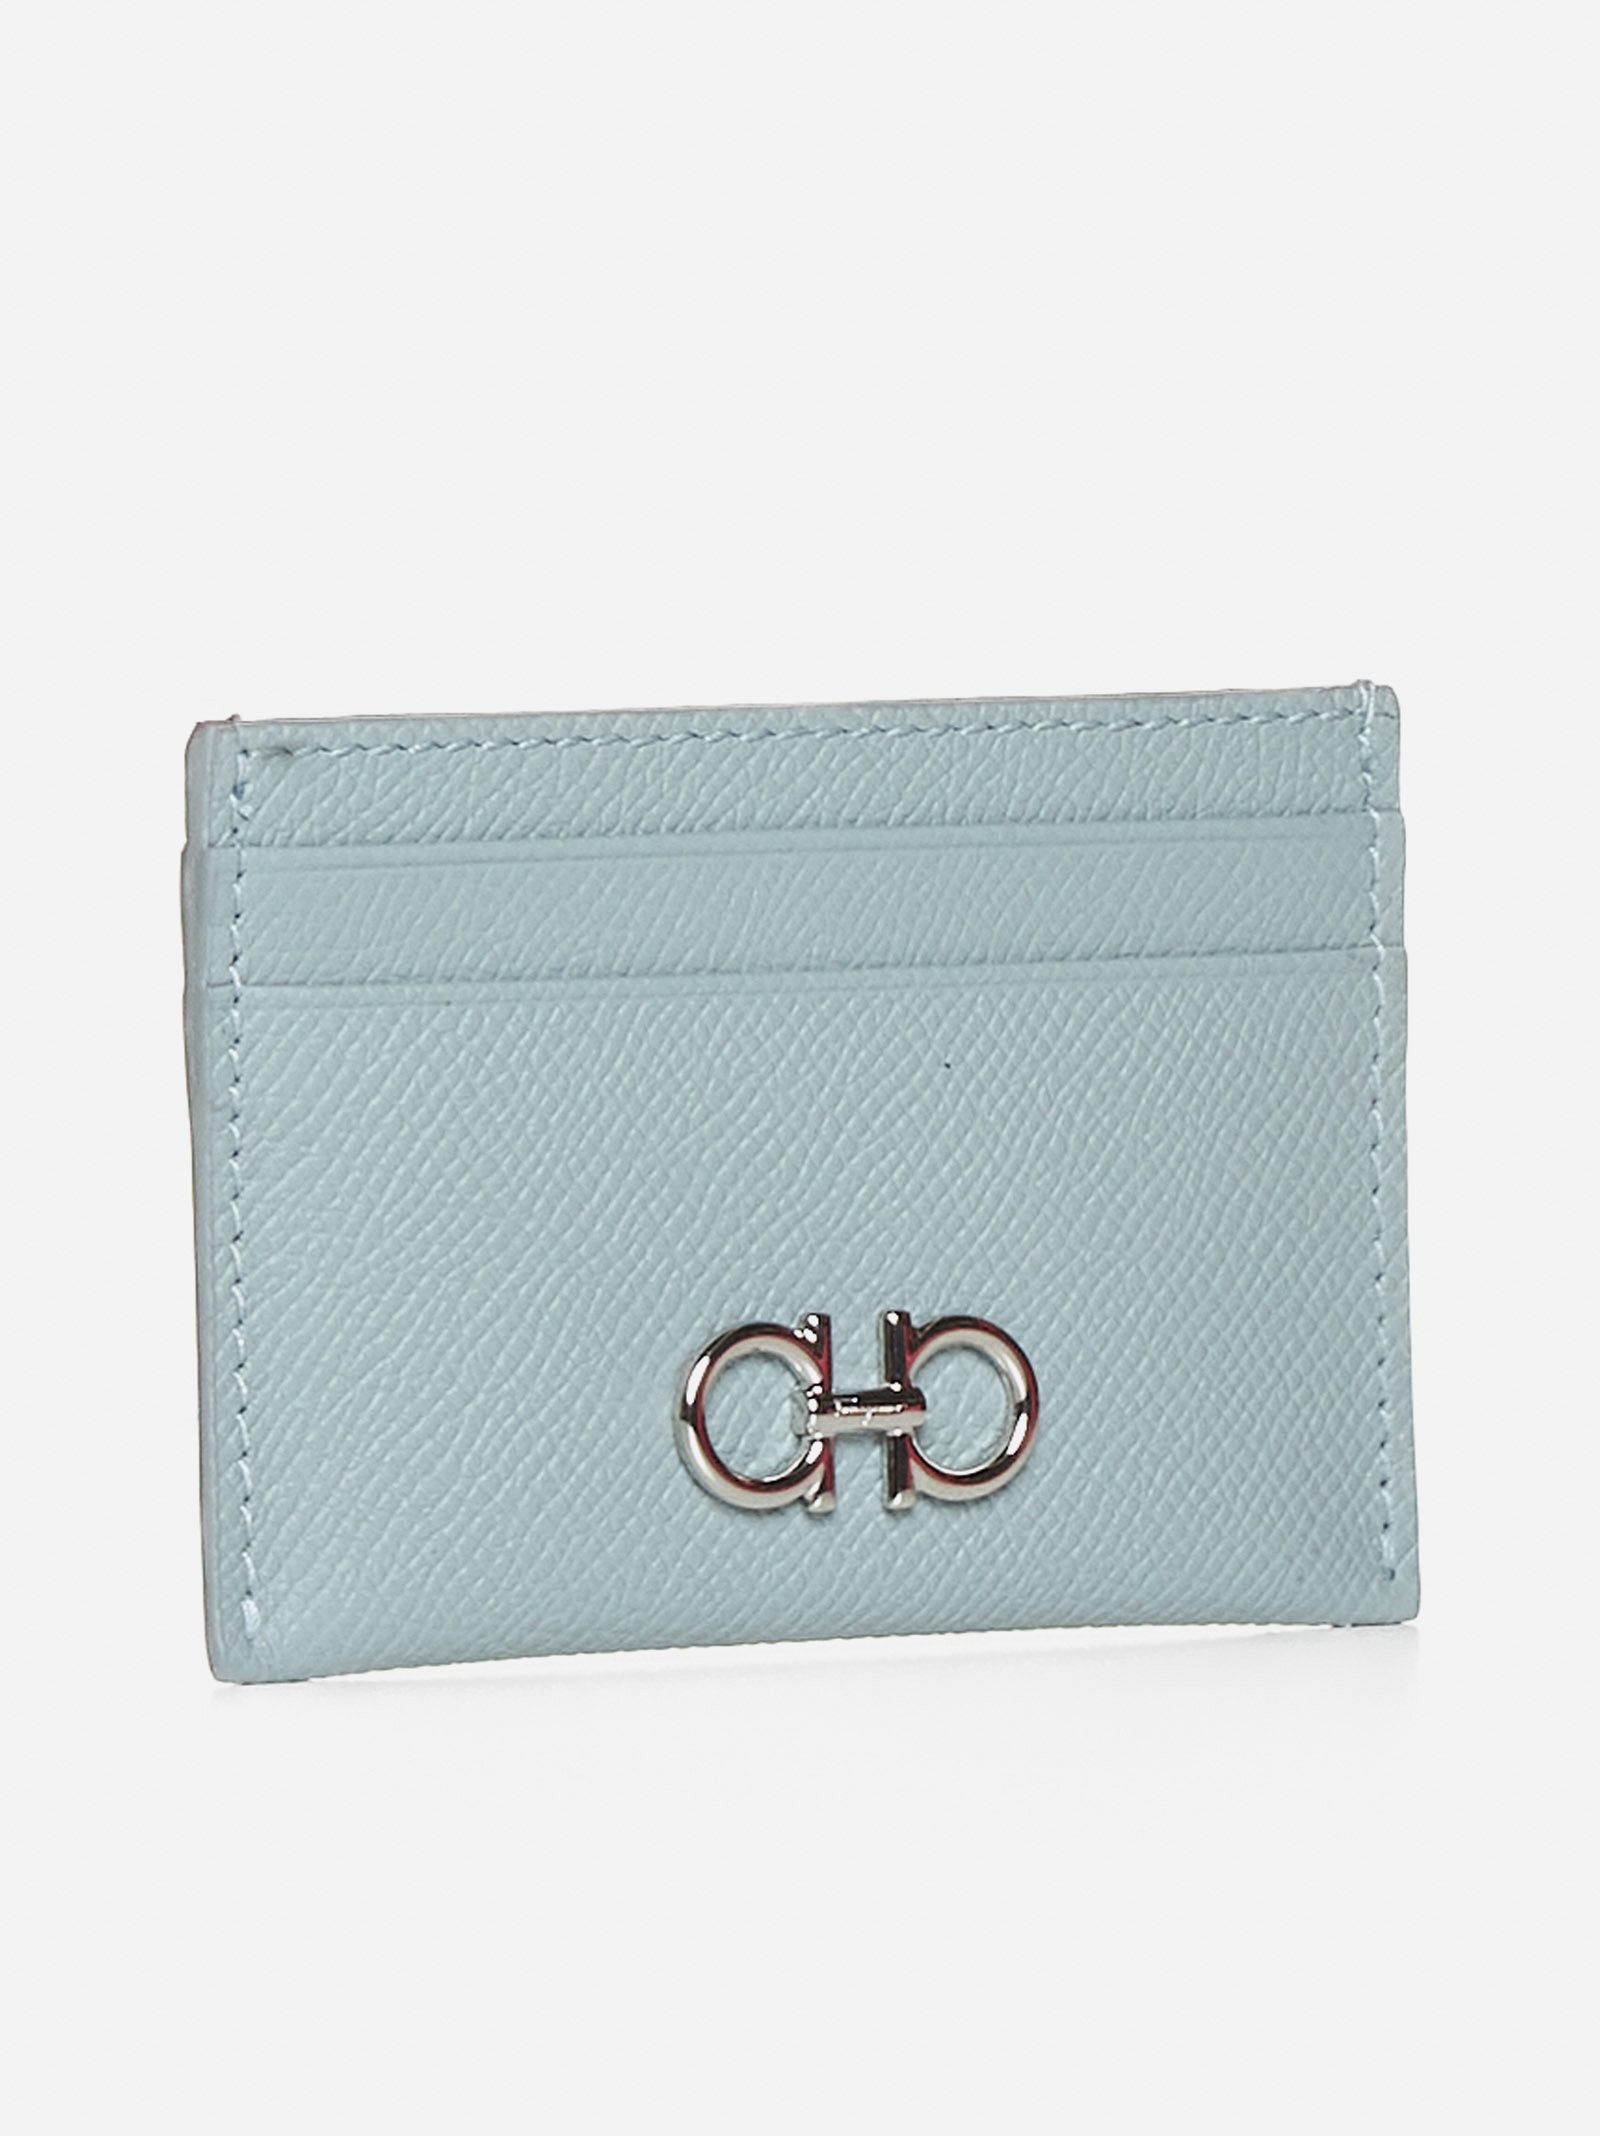 The Gancini leather card holder - 2